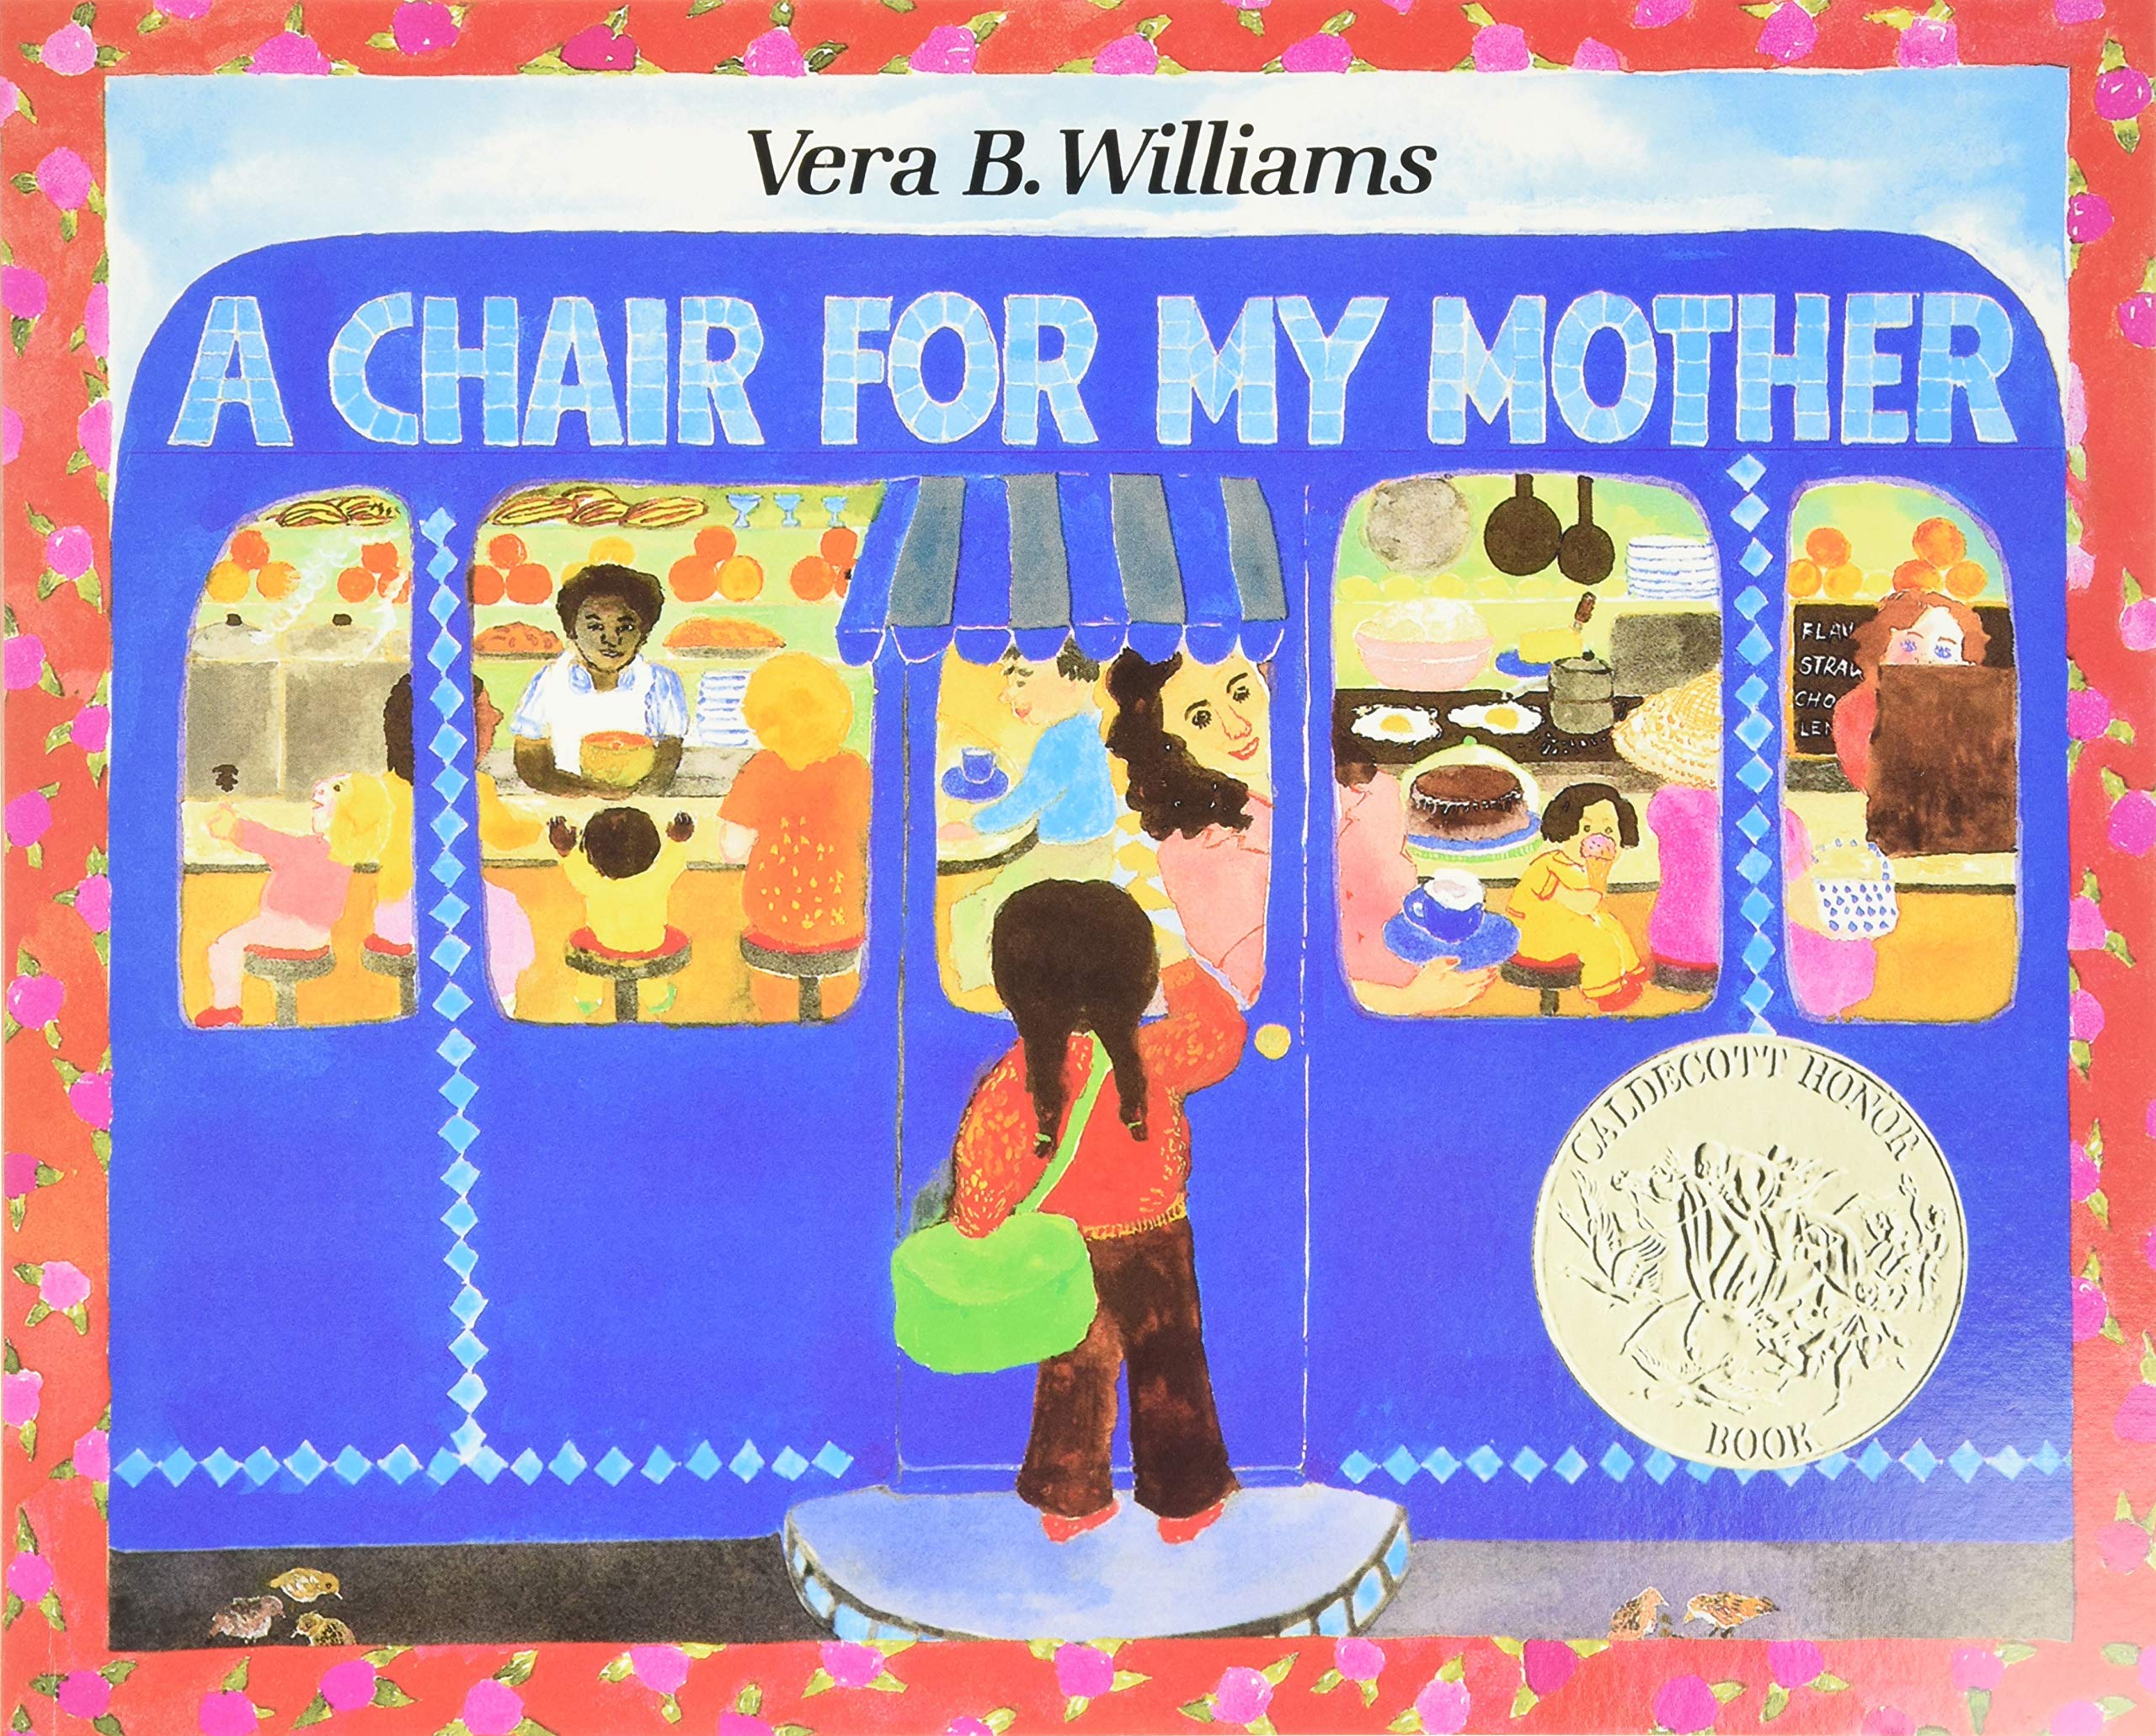 A Chair for My Mother by Vera B. Williams  book cover